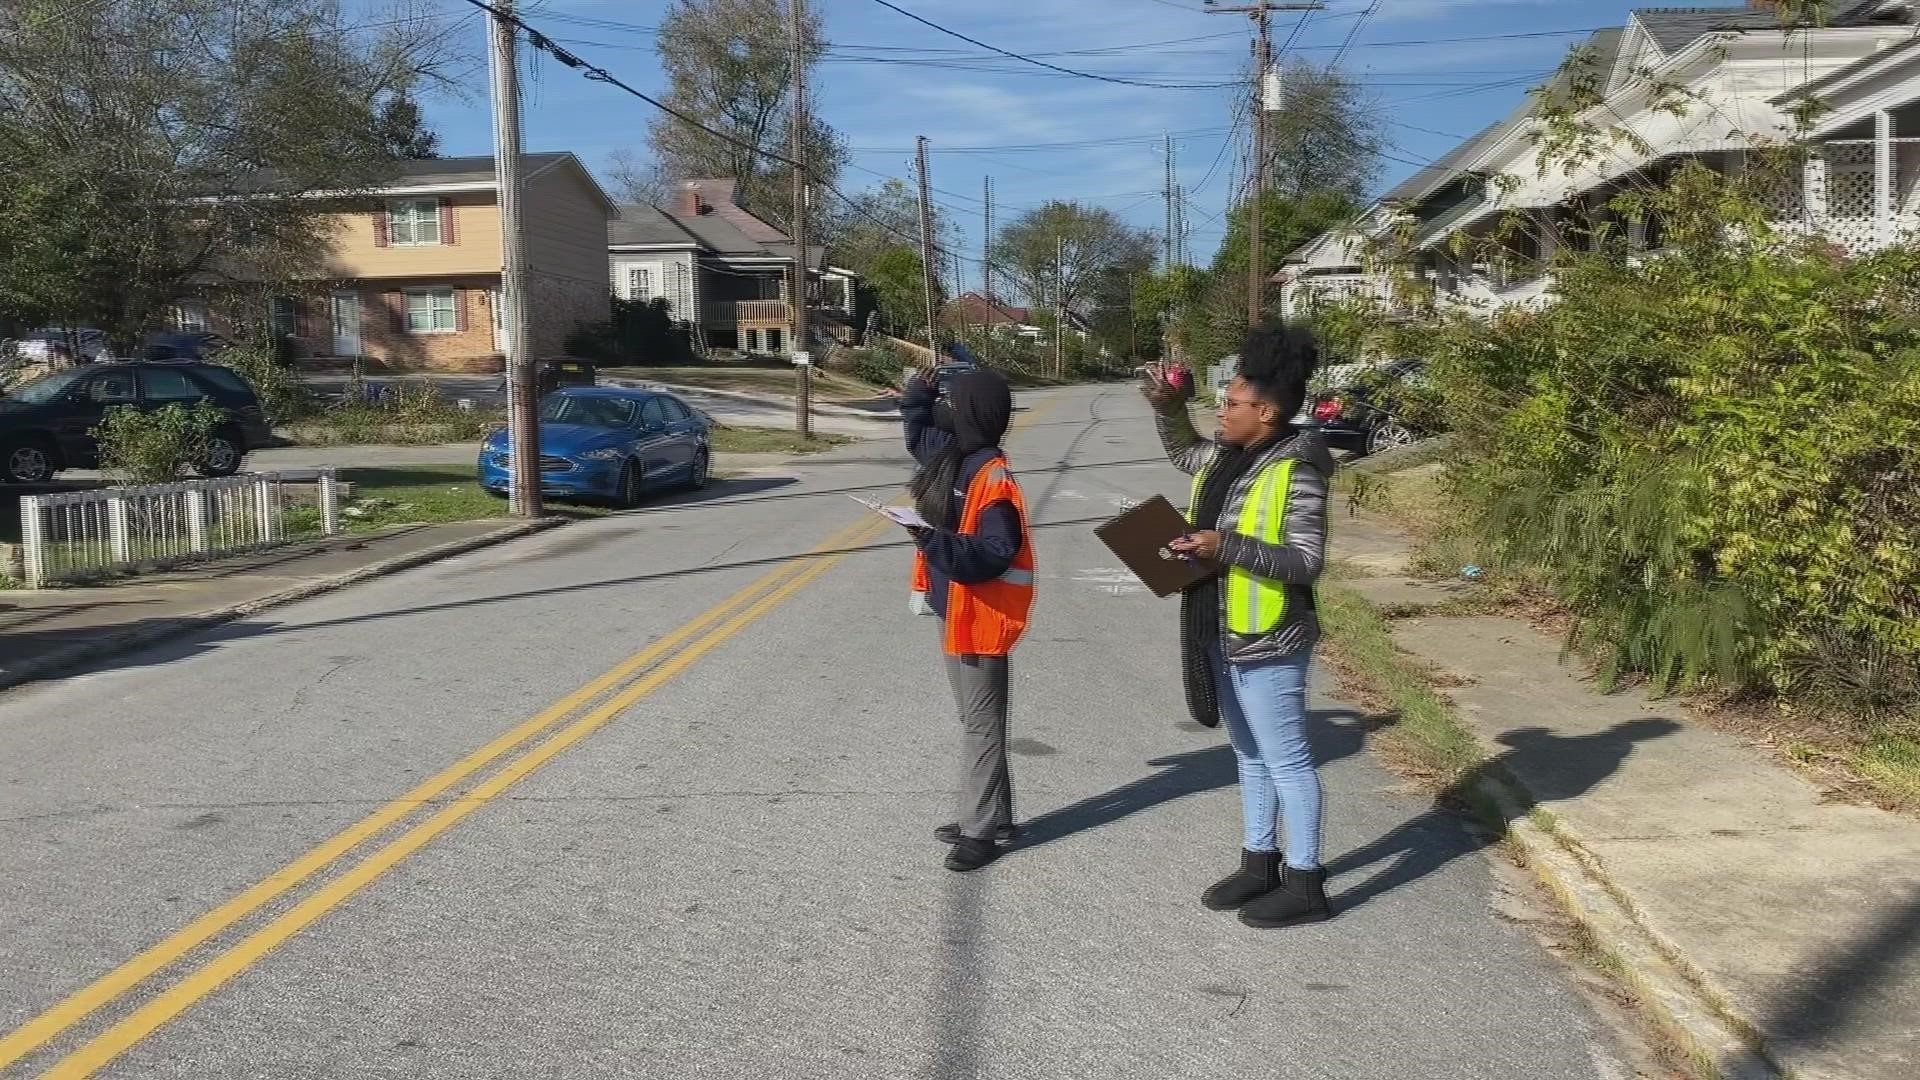 Volunteers walked street to street assessing what they say are vulnerabilities of properties for crime.